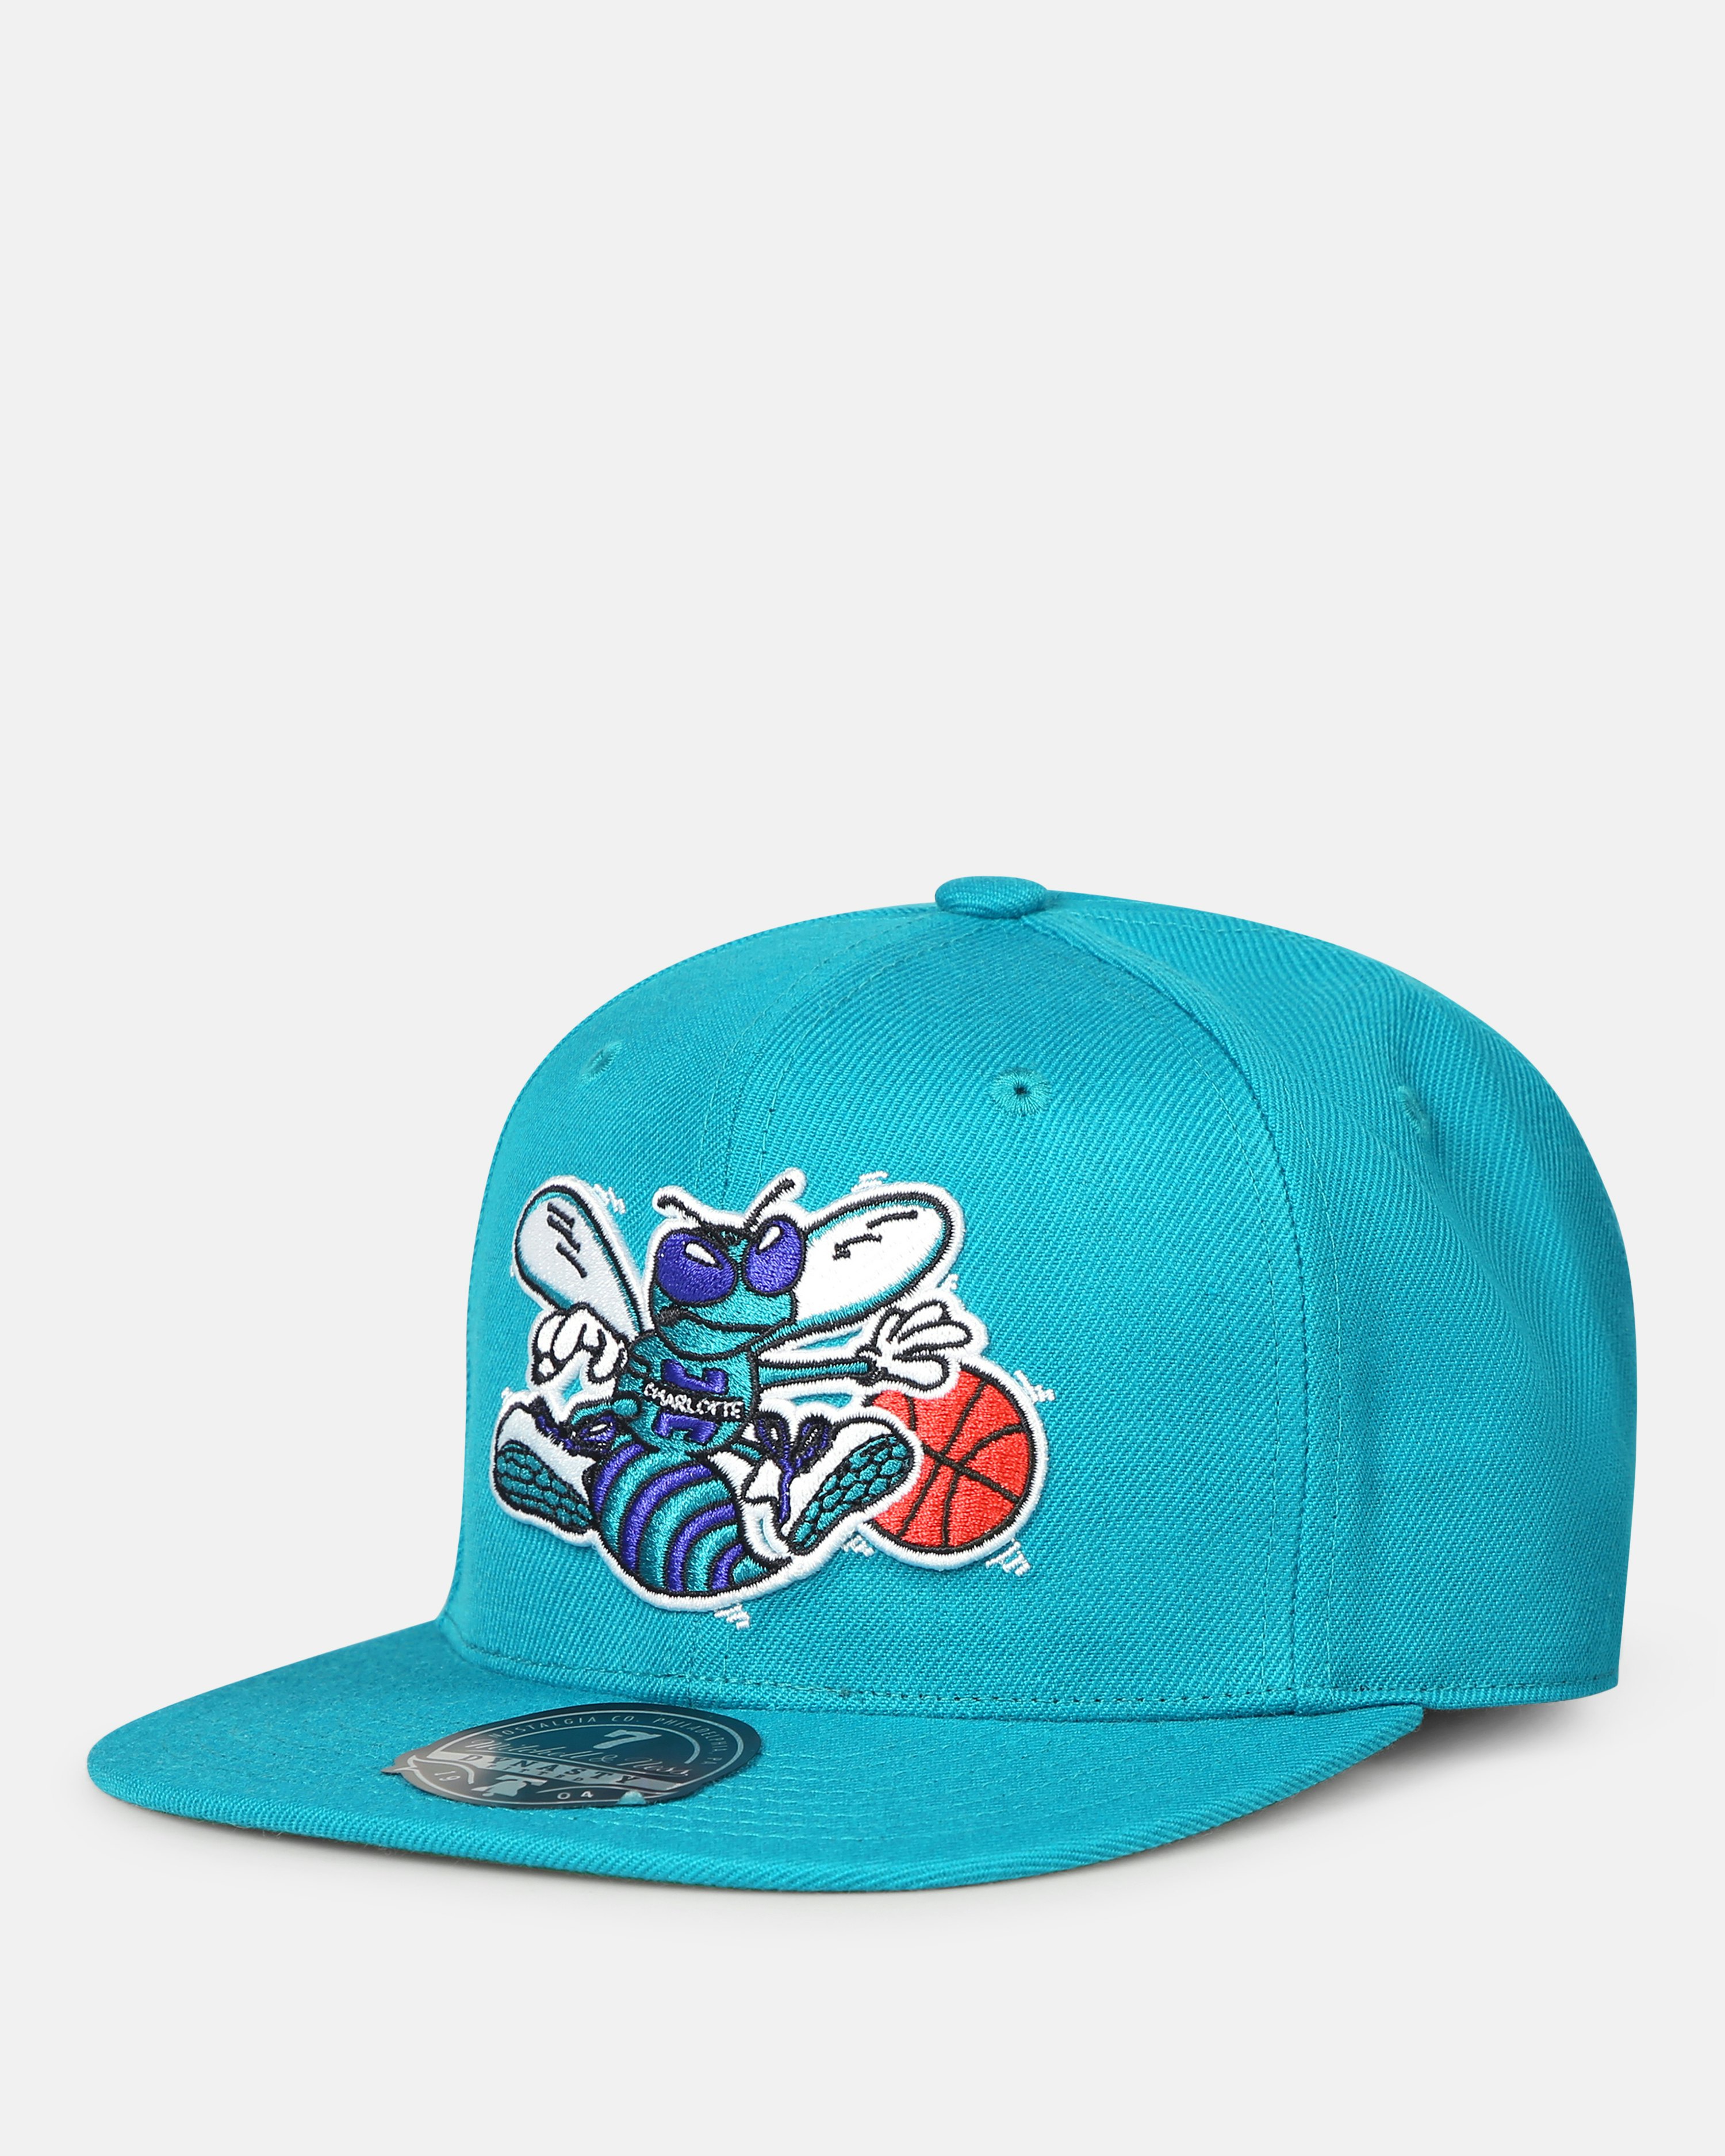 charlotte hornets mitchell and ness hat